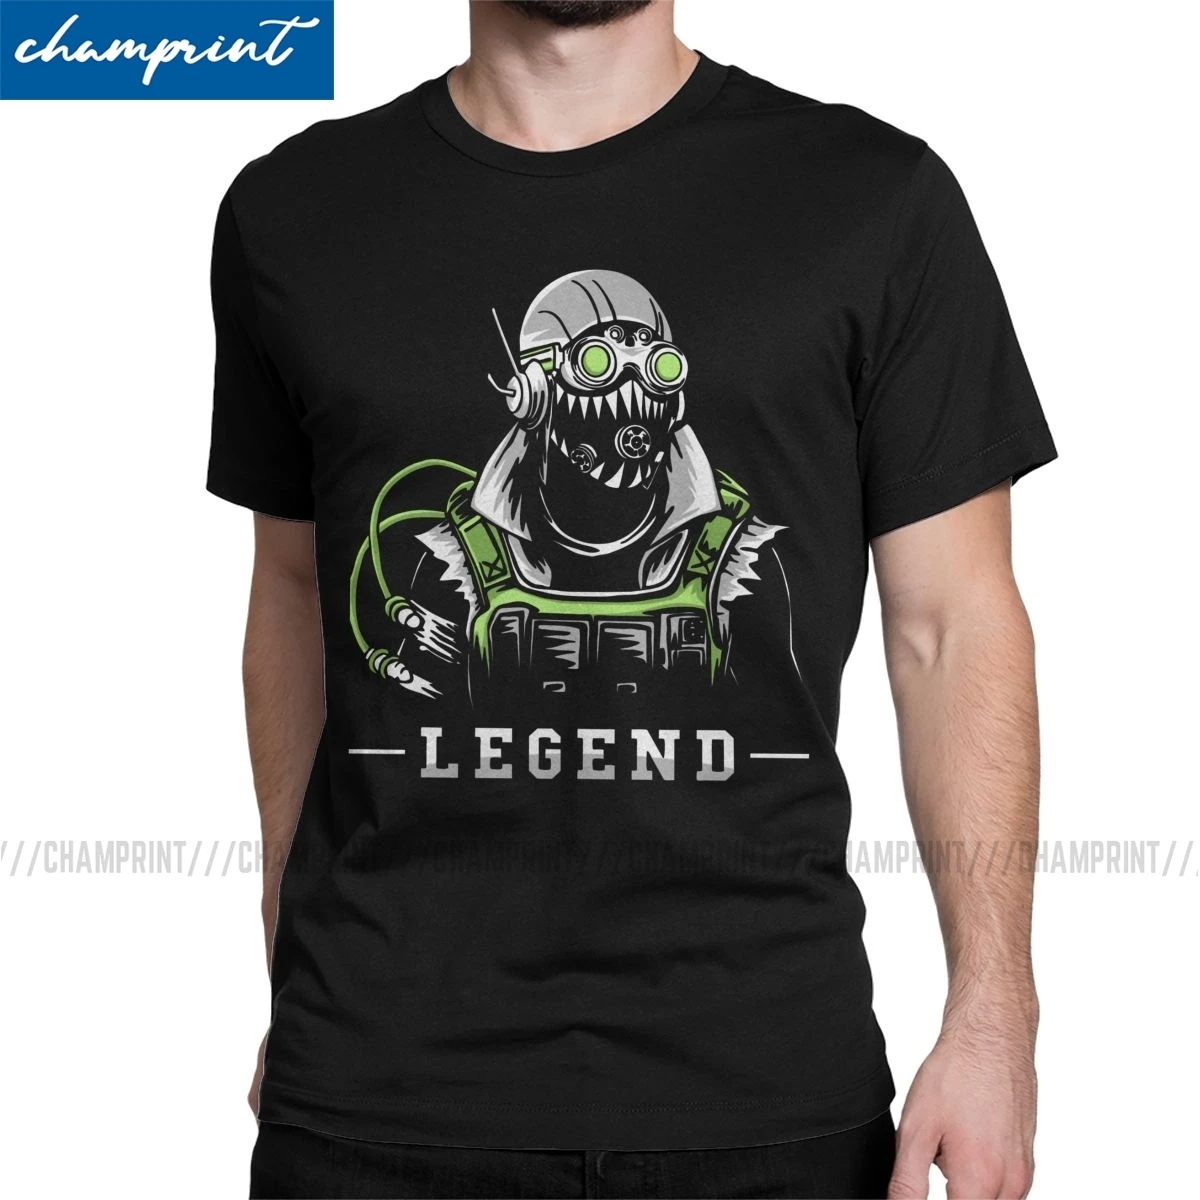 

Octane Apex T-Shirts for Men Apex Legends Pathfinder Bangalore 80s Game Humorous Tee Shirt Short Sleeve T Shirt Gift Clothes